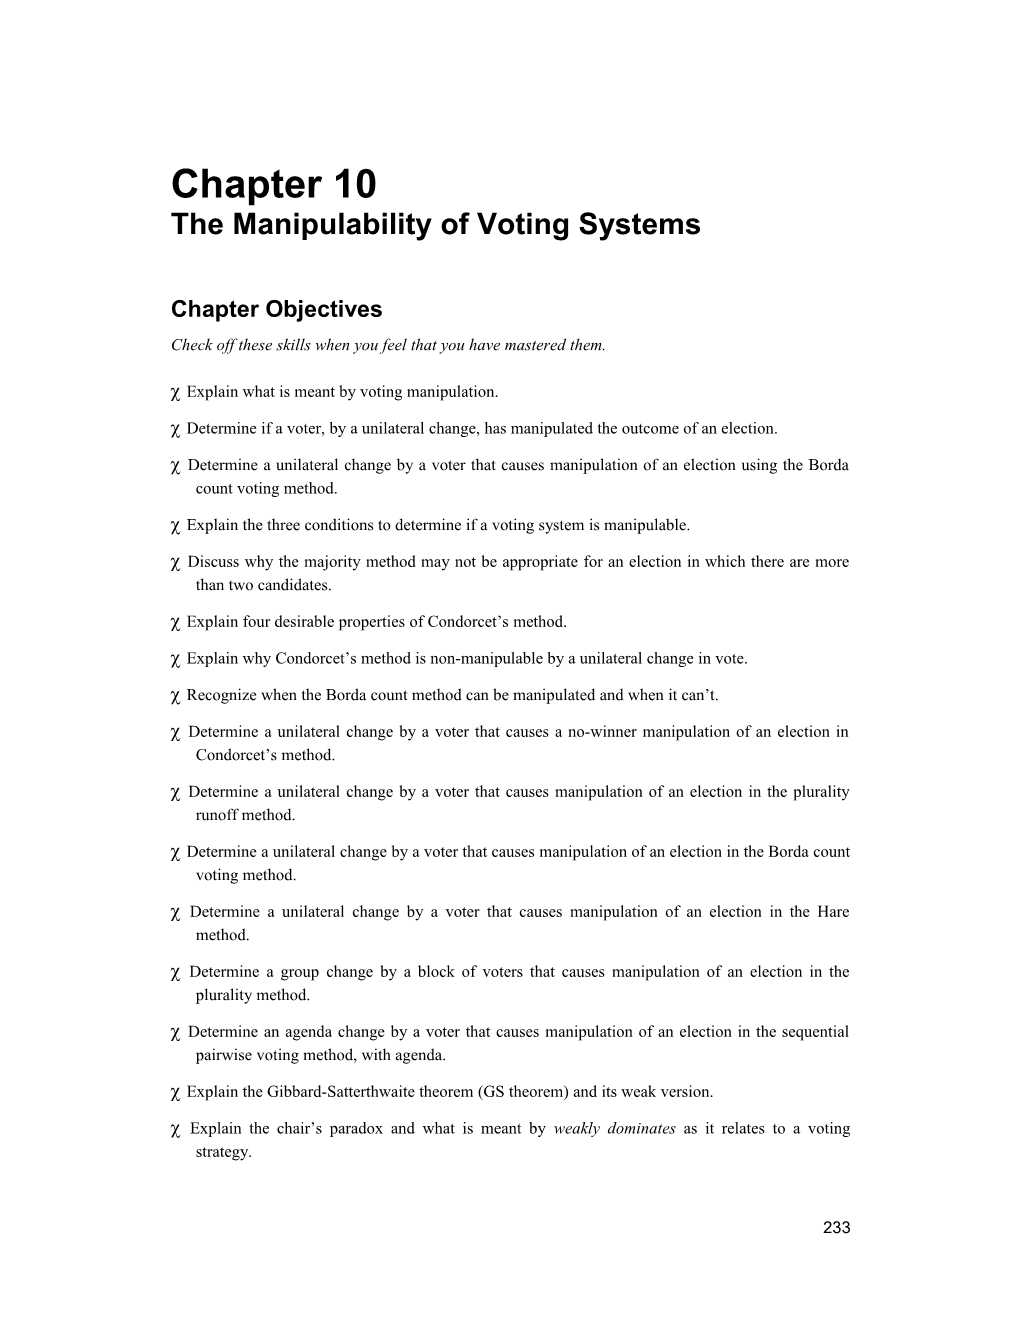 The Manipulability of Voting Systems